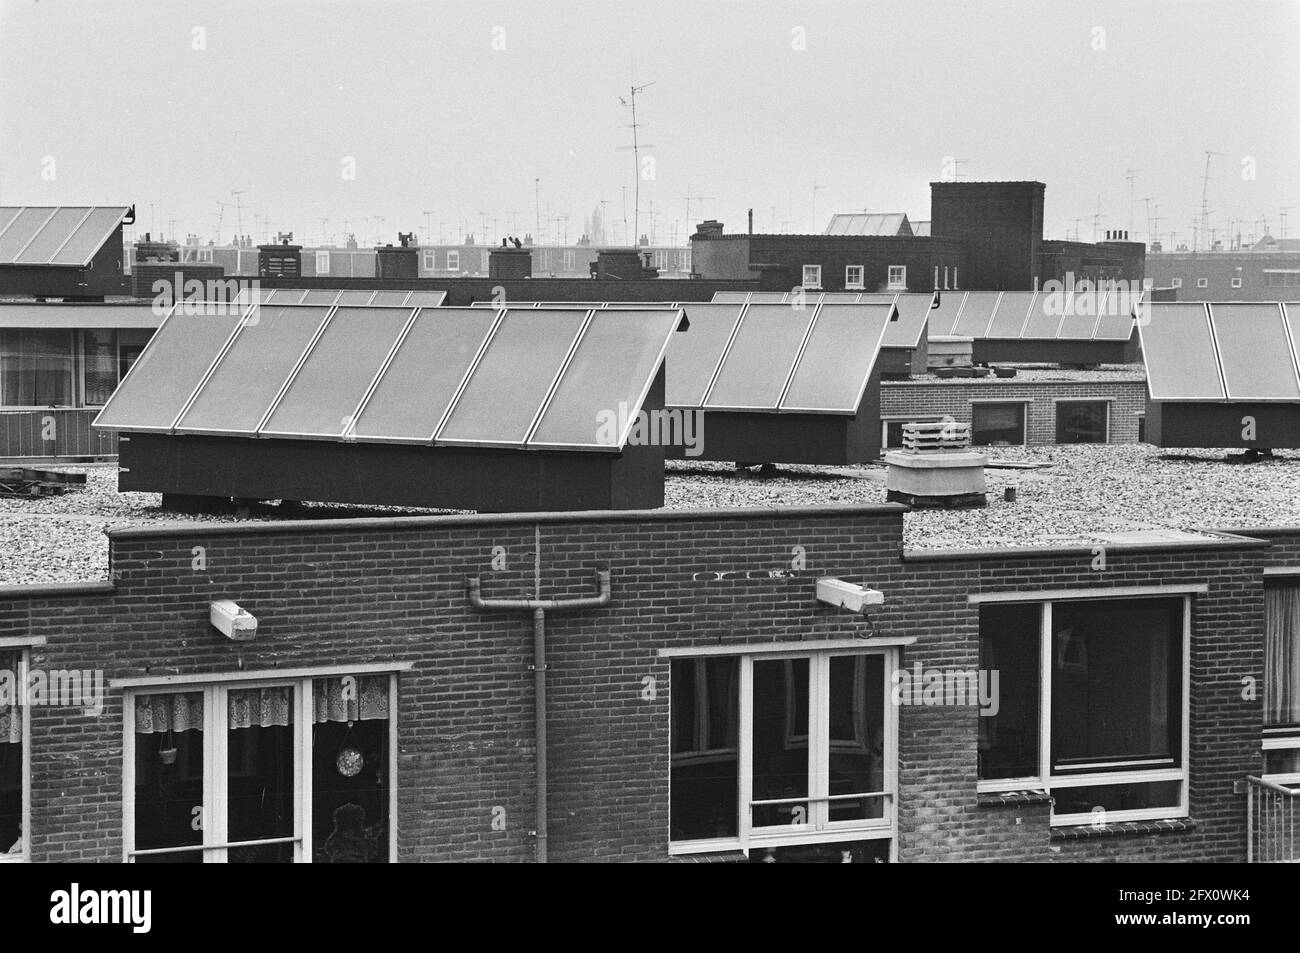 Solar water heaters on roofs of new buildings in Formosa Street as trial and with the help of 34 boilers provide the dwellings with warm water, February 24, 1982, NEWBOUW, solar water heaters, The Netherlands, 20th century press agency photo, news to remember, documentary, historic photography 1945-1990, visual stories, human history of the Twentieth Century, capturing moments in time Stock Photo